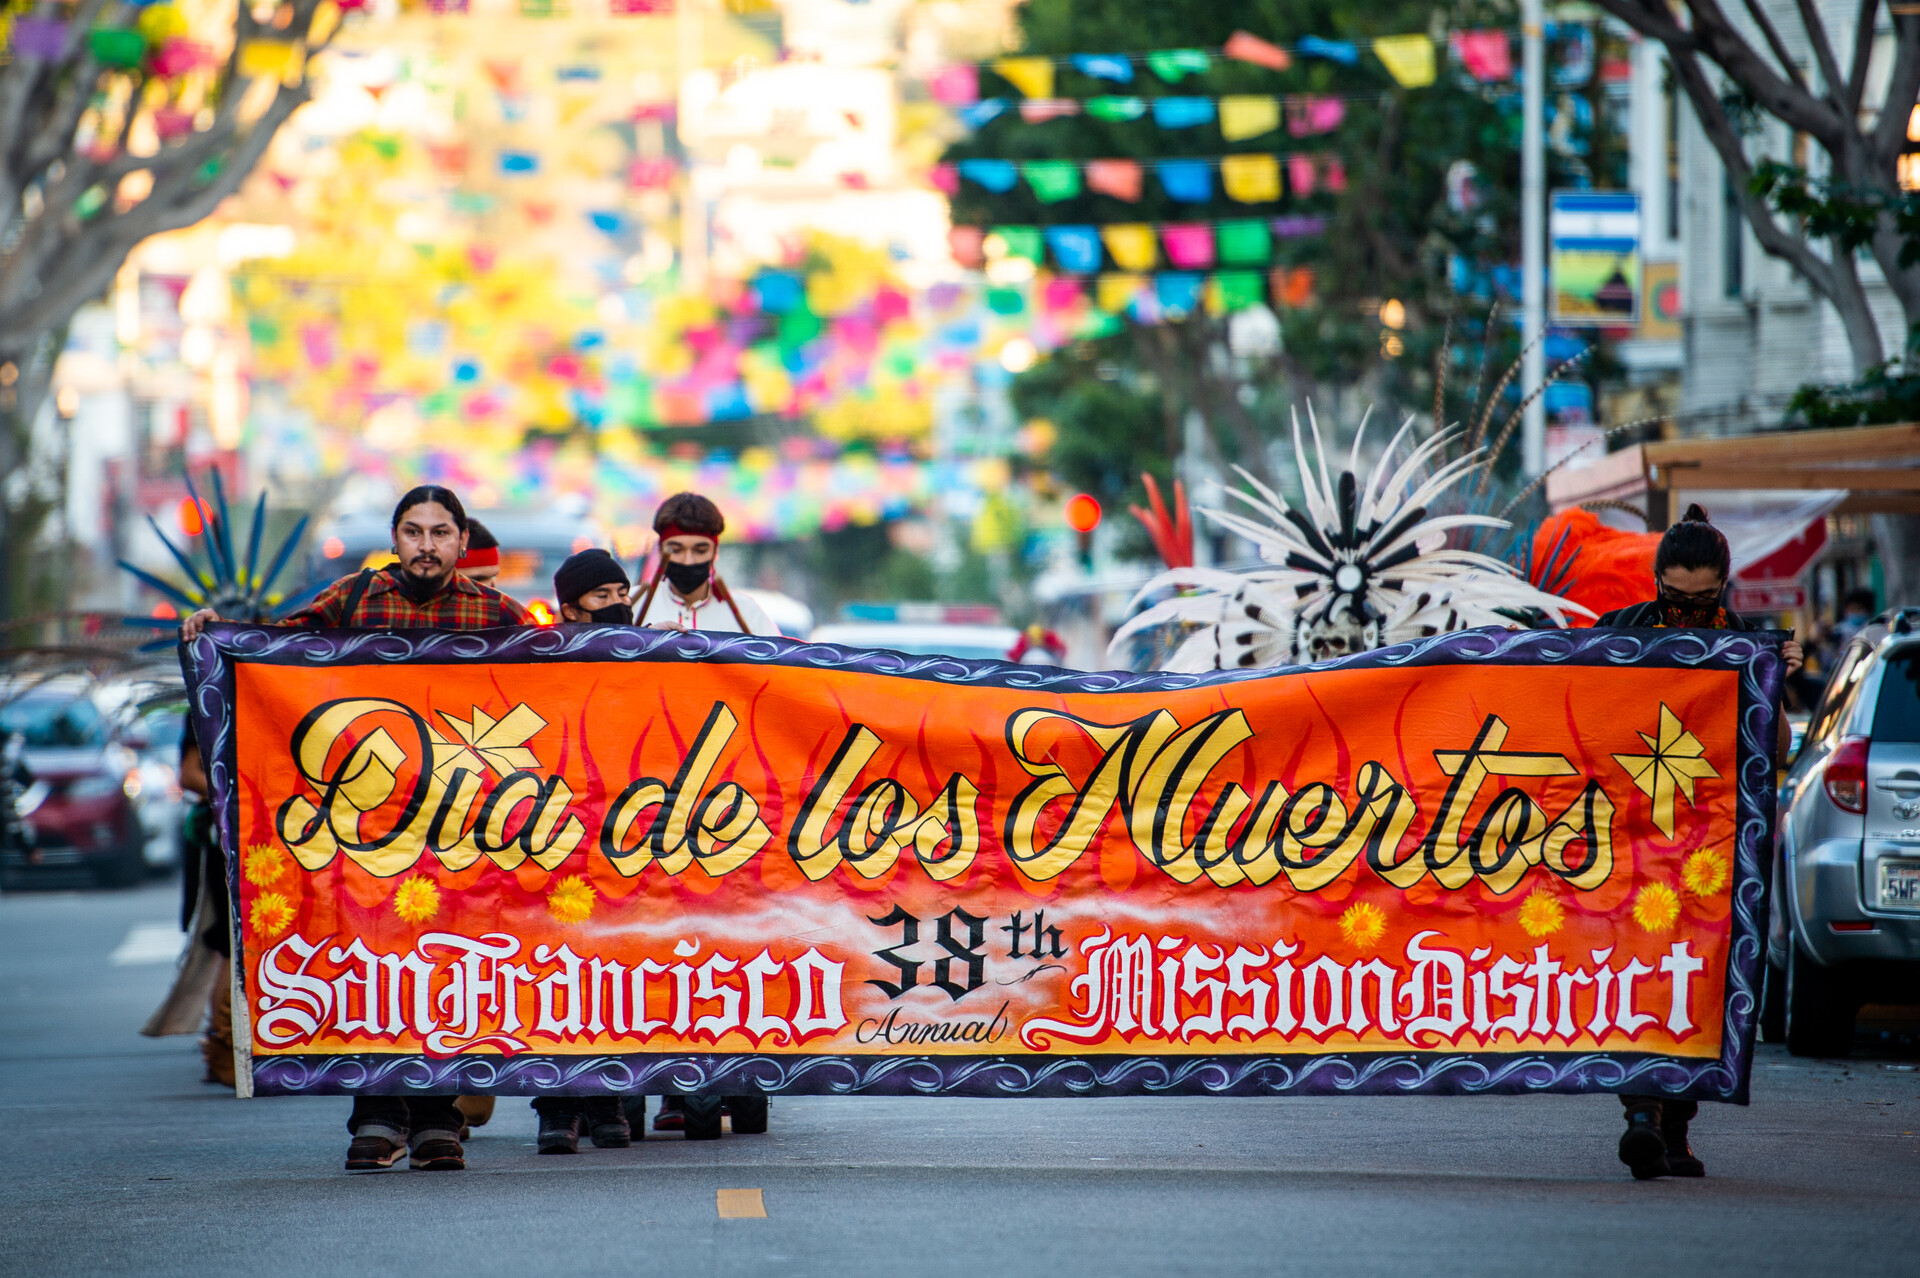 A group of people carries a bright orange banner down the middle of a street.